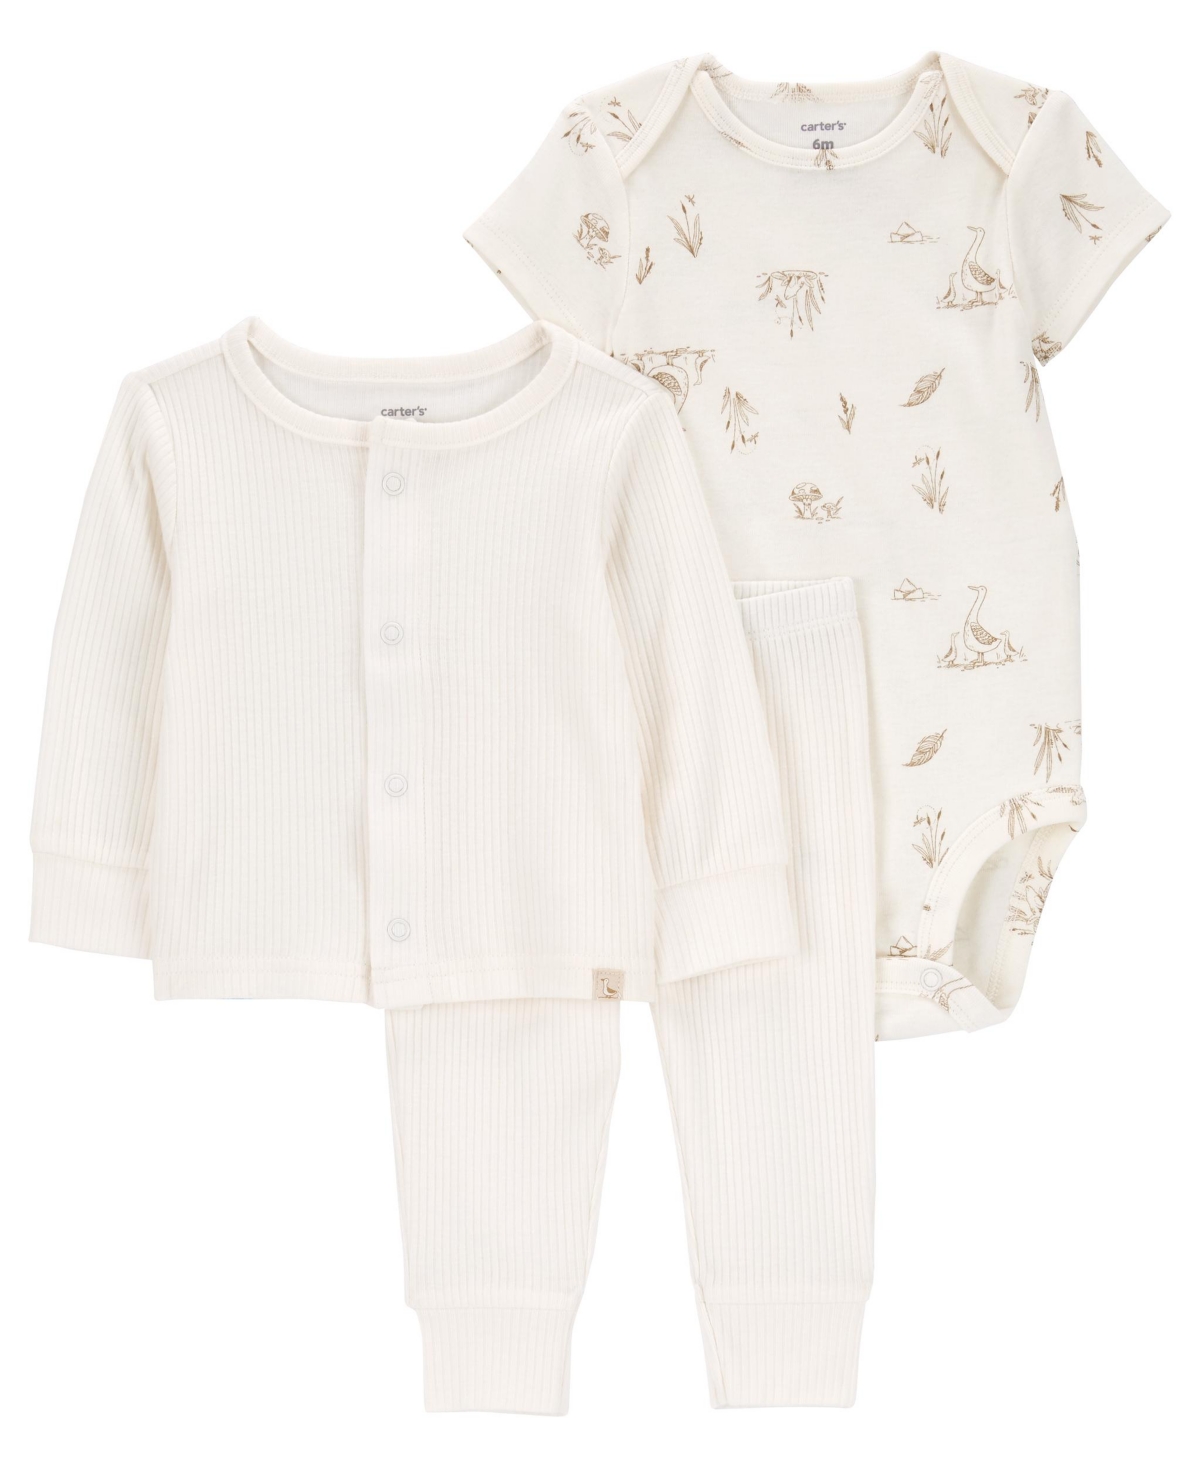 Carter's Baby Boys Or Baby Girls Little Cardigan, Bodysuit And Pants, 3 Piece Set In White